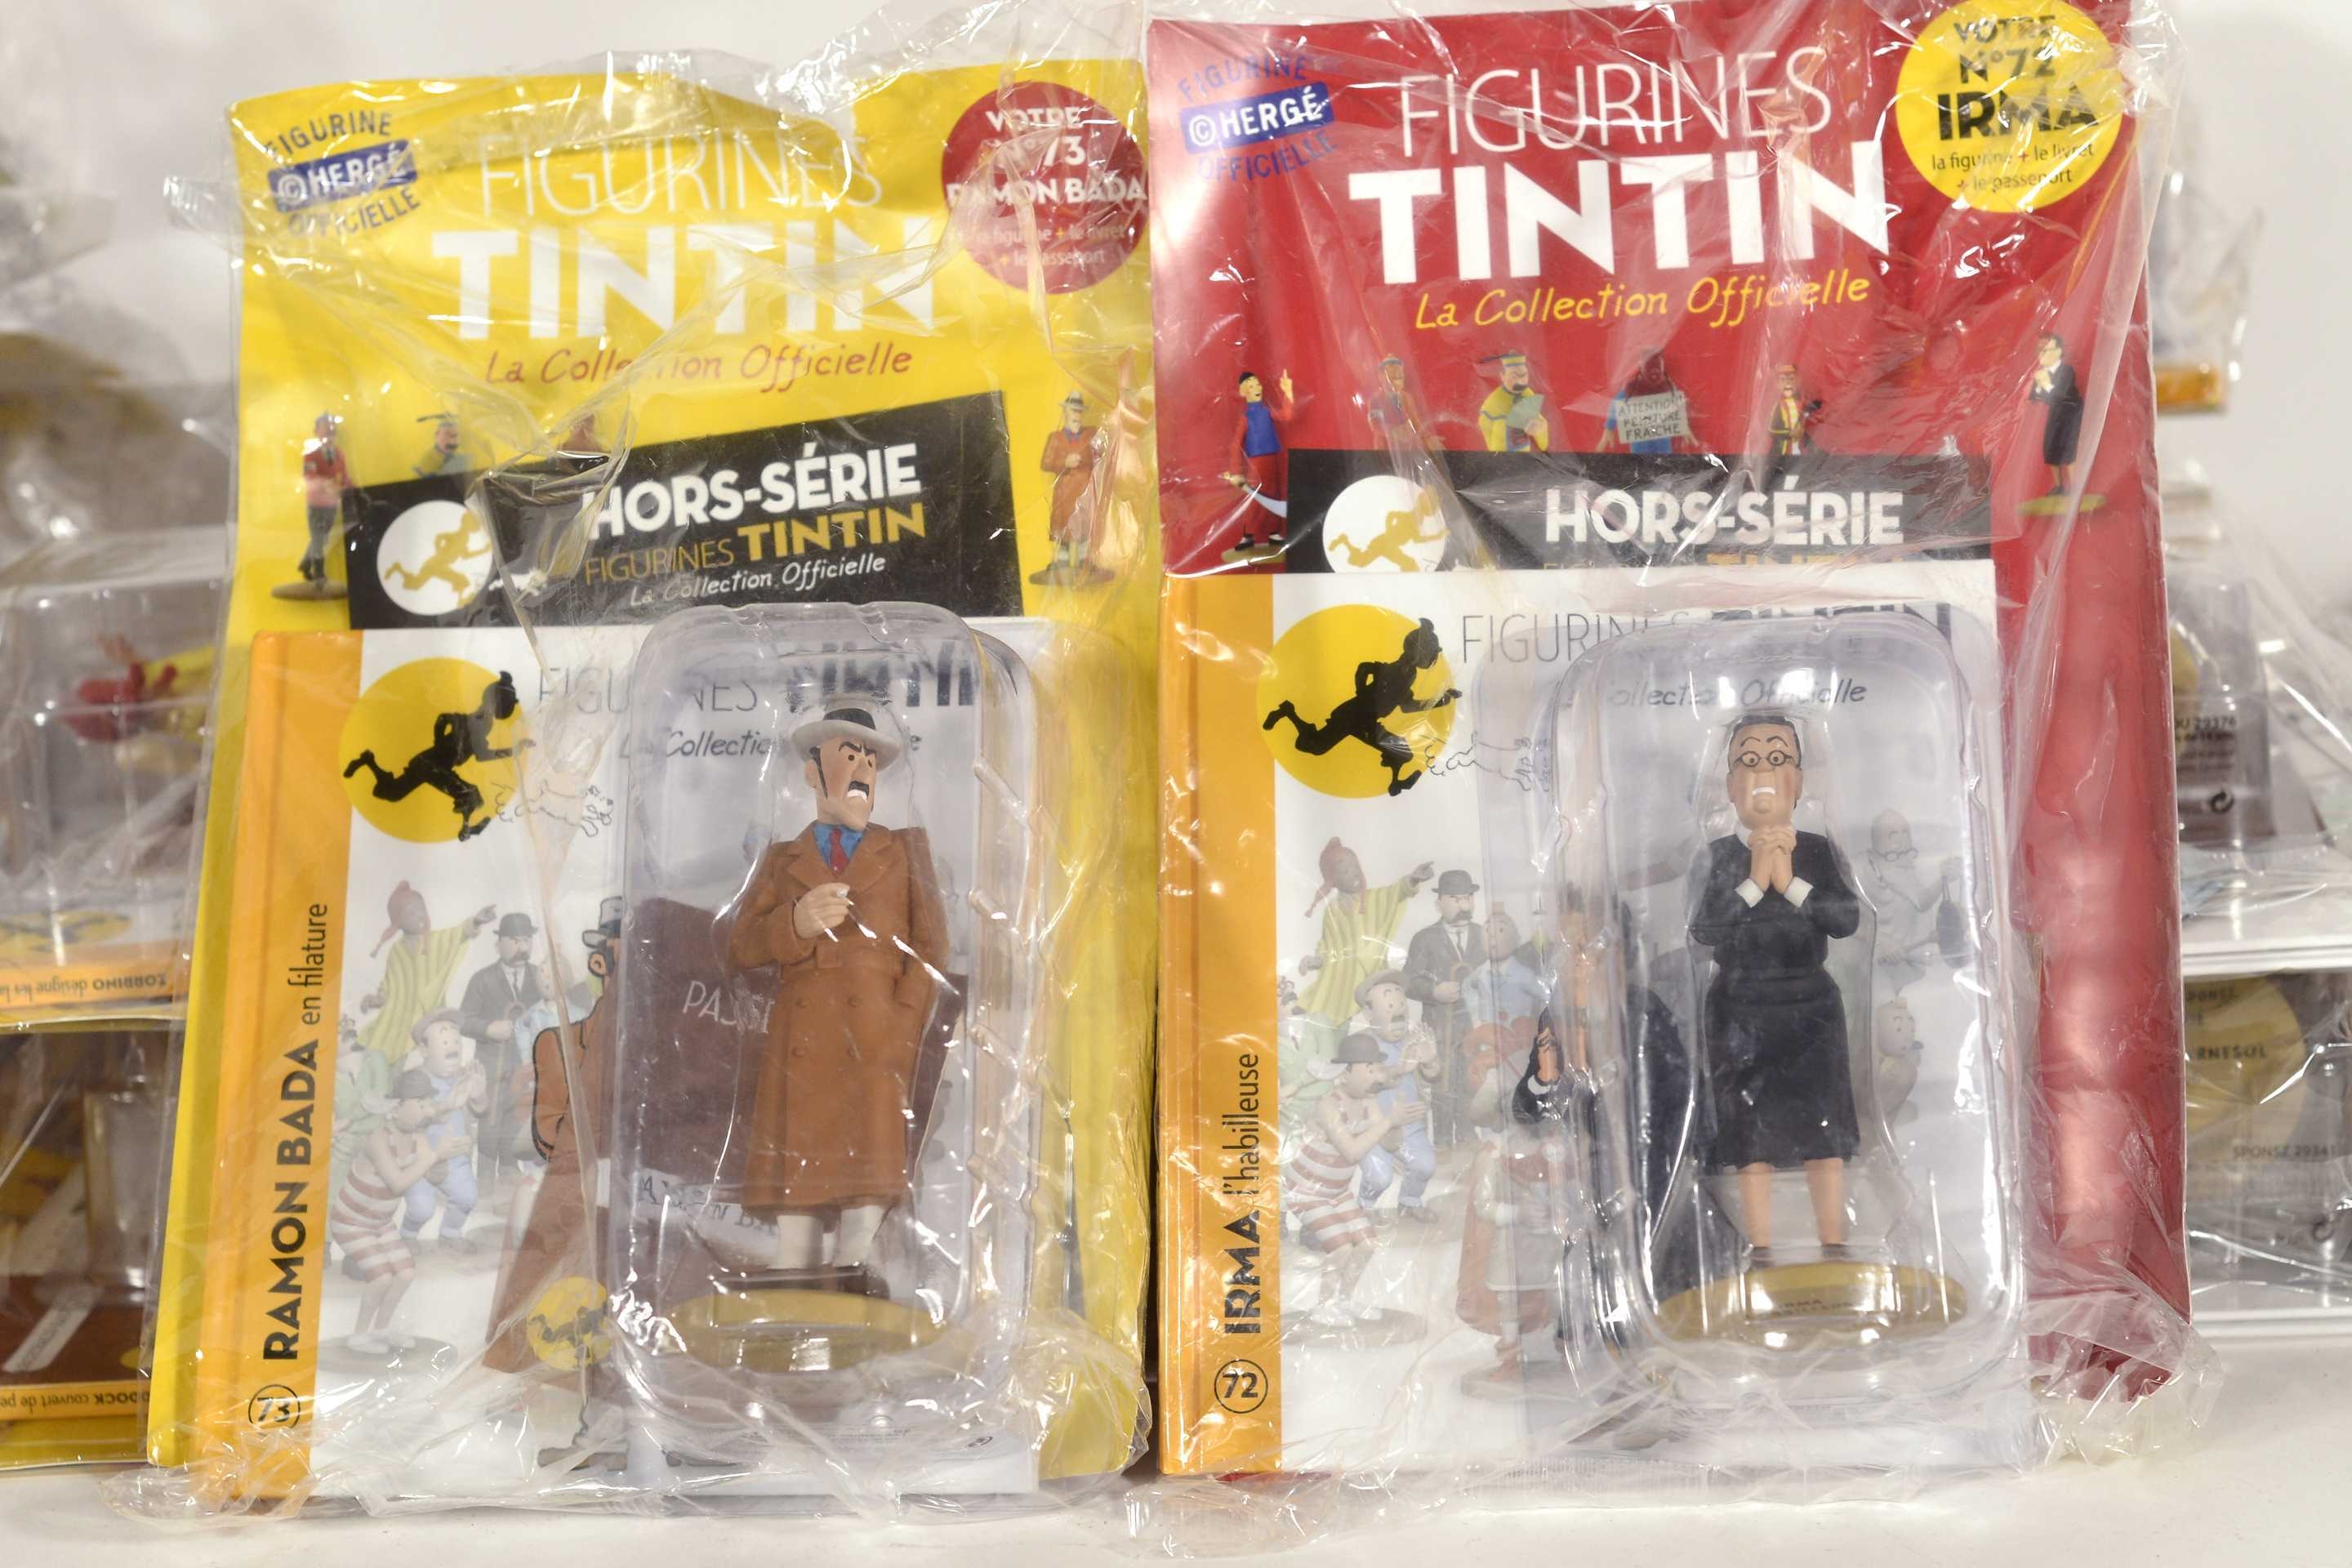 Hergé, Lot of Tintin figurines from La Collection officielle (The official  collection) - 2011-2015